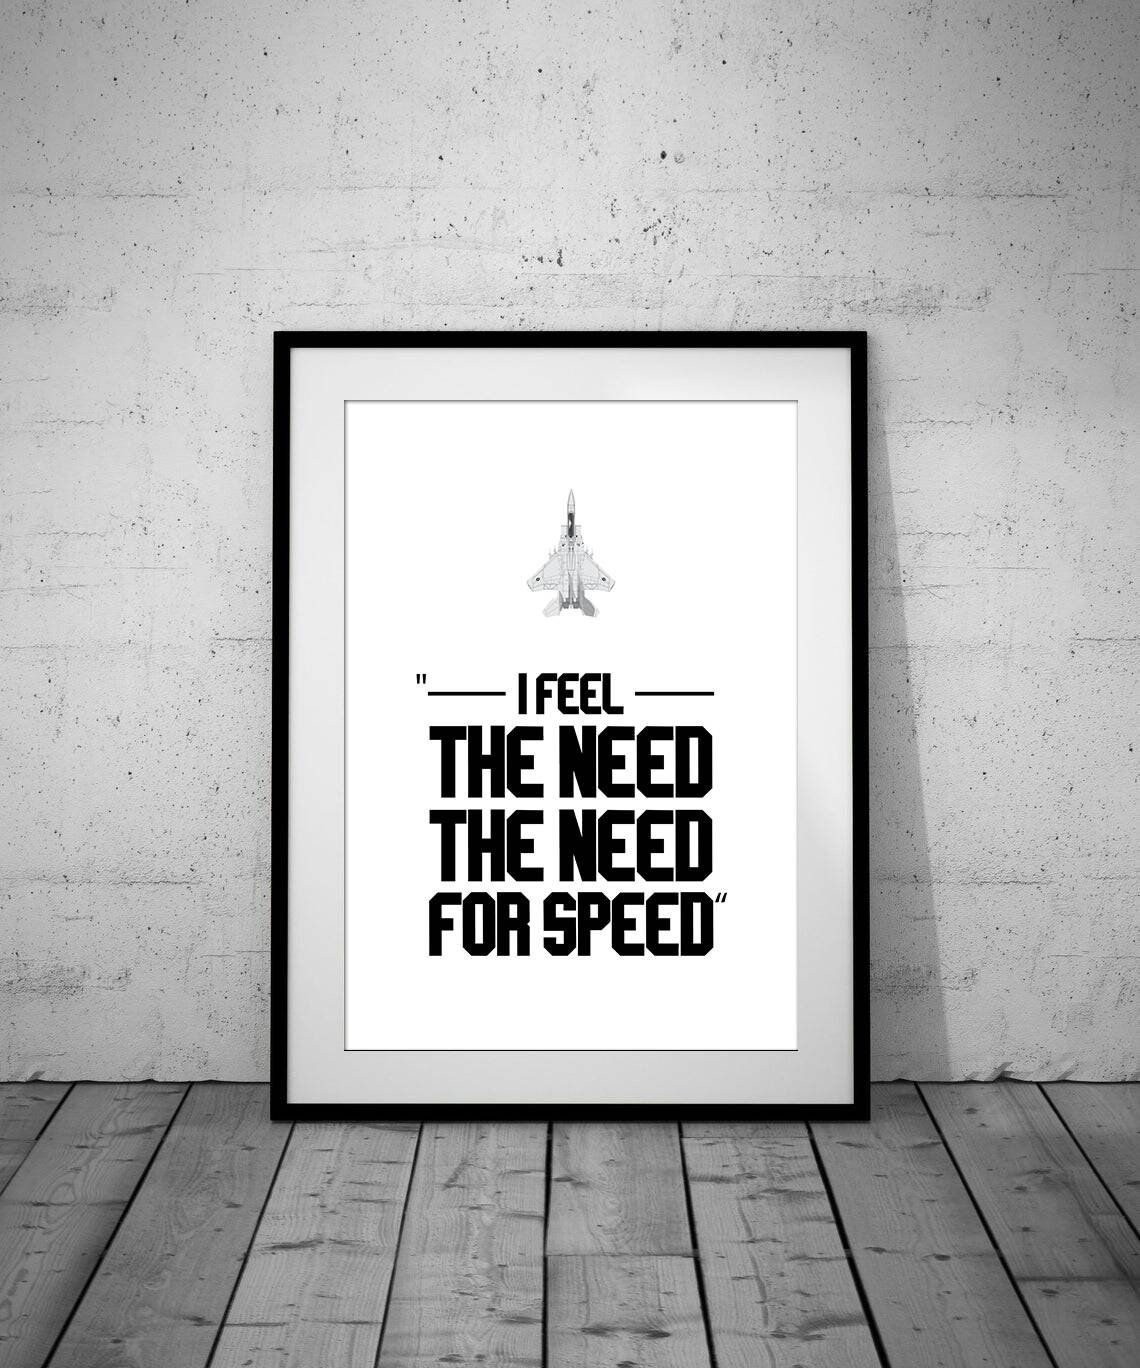 Pic of the Day: “I feel the need… the need for speed!”